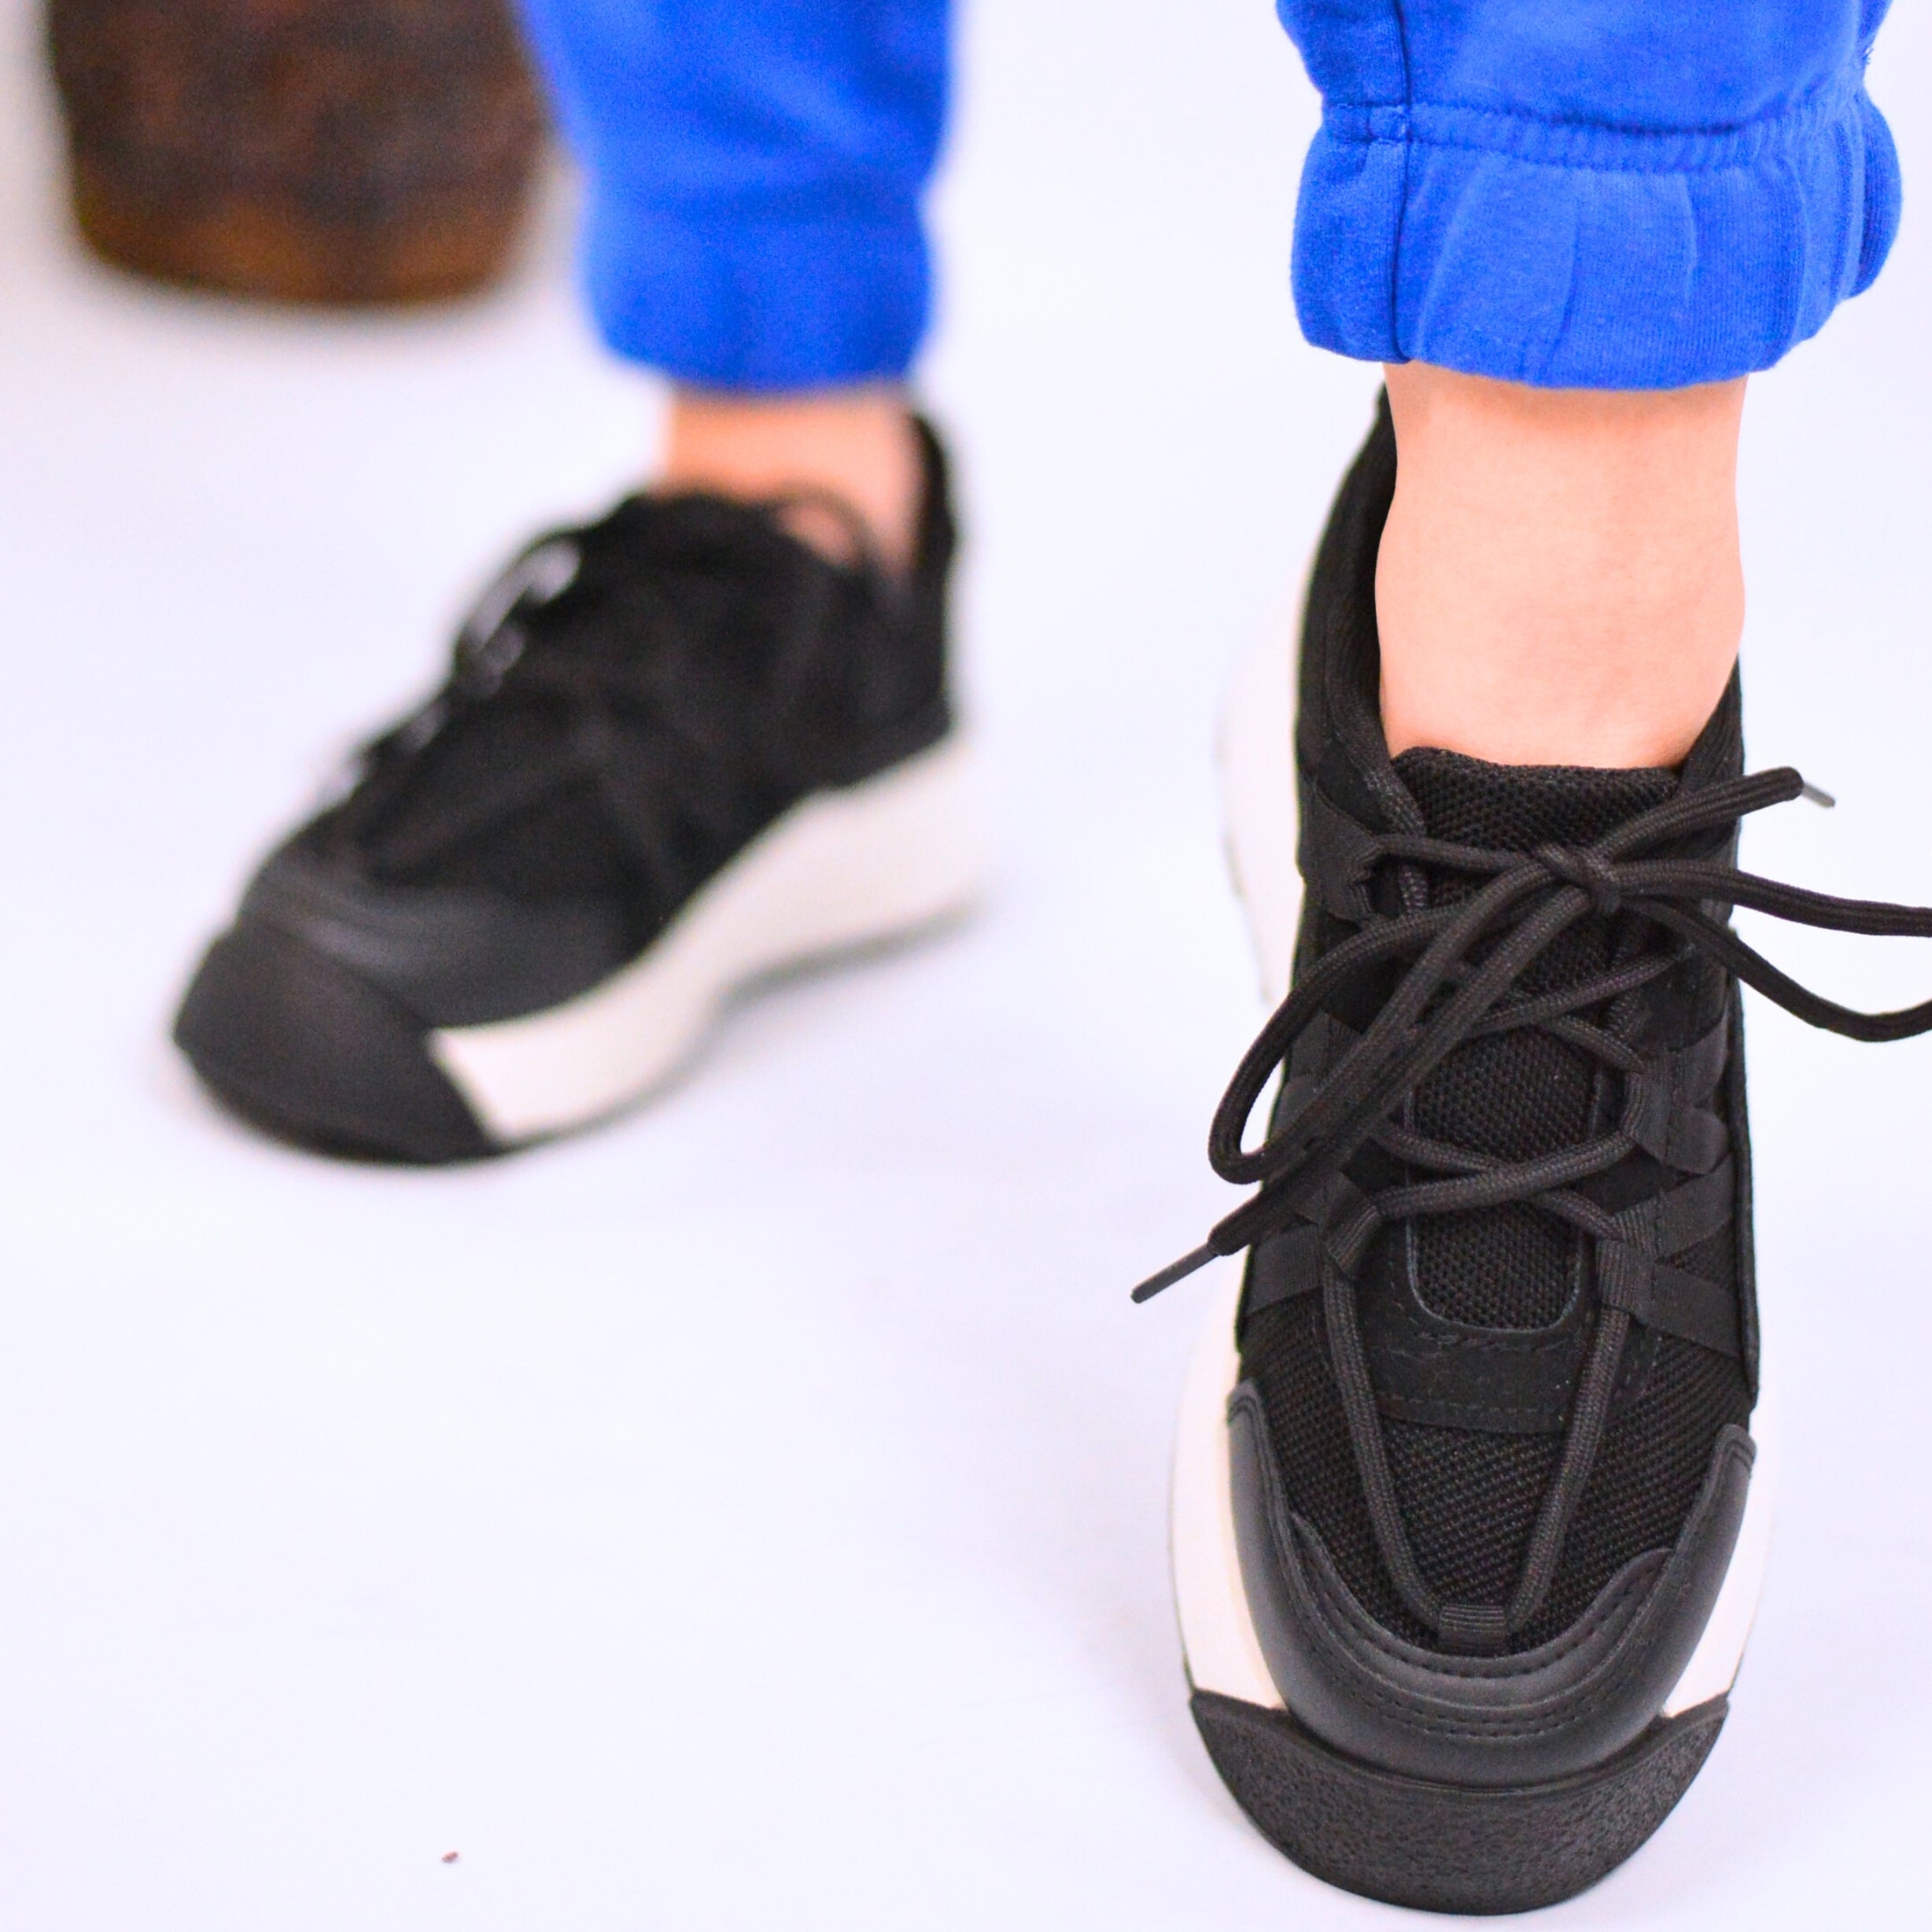 Women's Black Irina Sneakers Shoes Made of Textile Material and Eco Leather